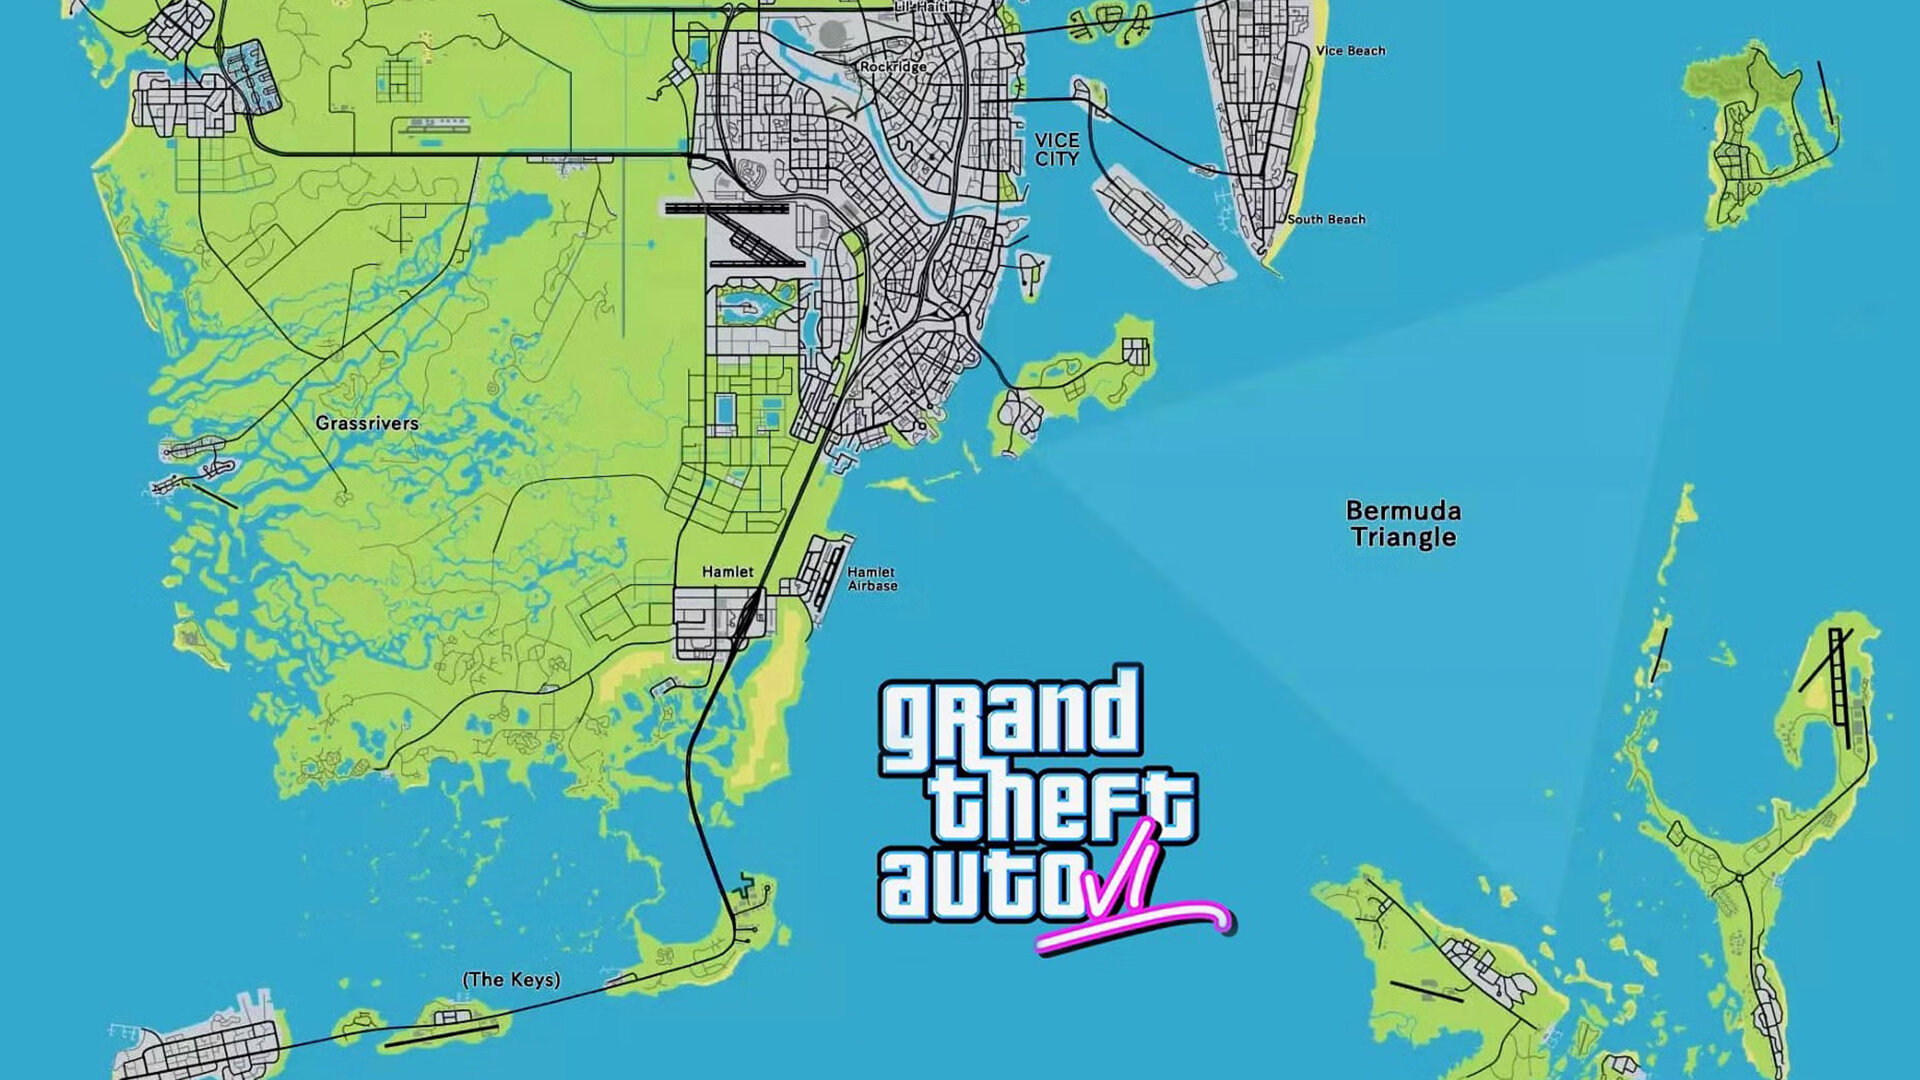 More information about "Grand Theft Auto 6 Map: Here’s What You Must Know"